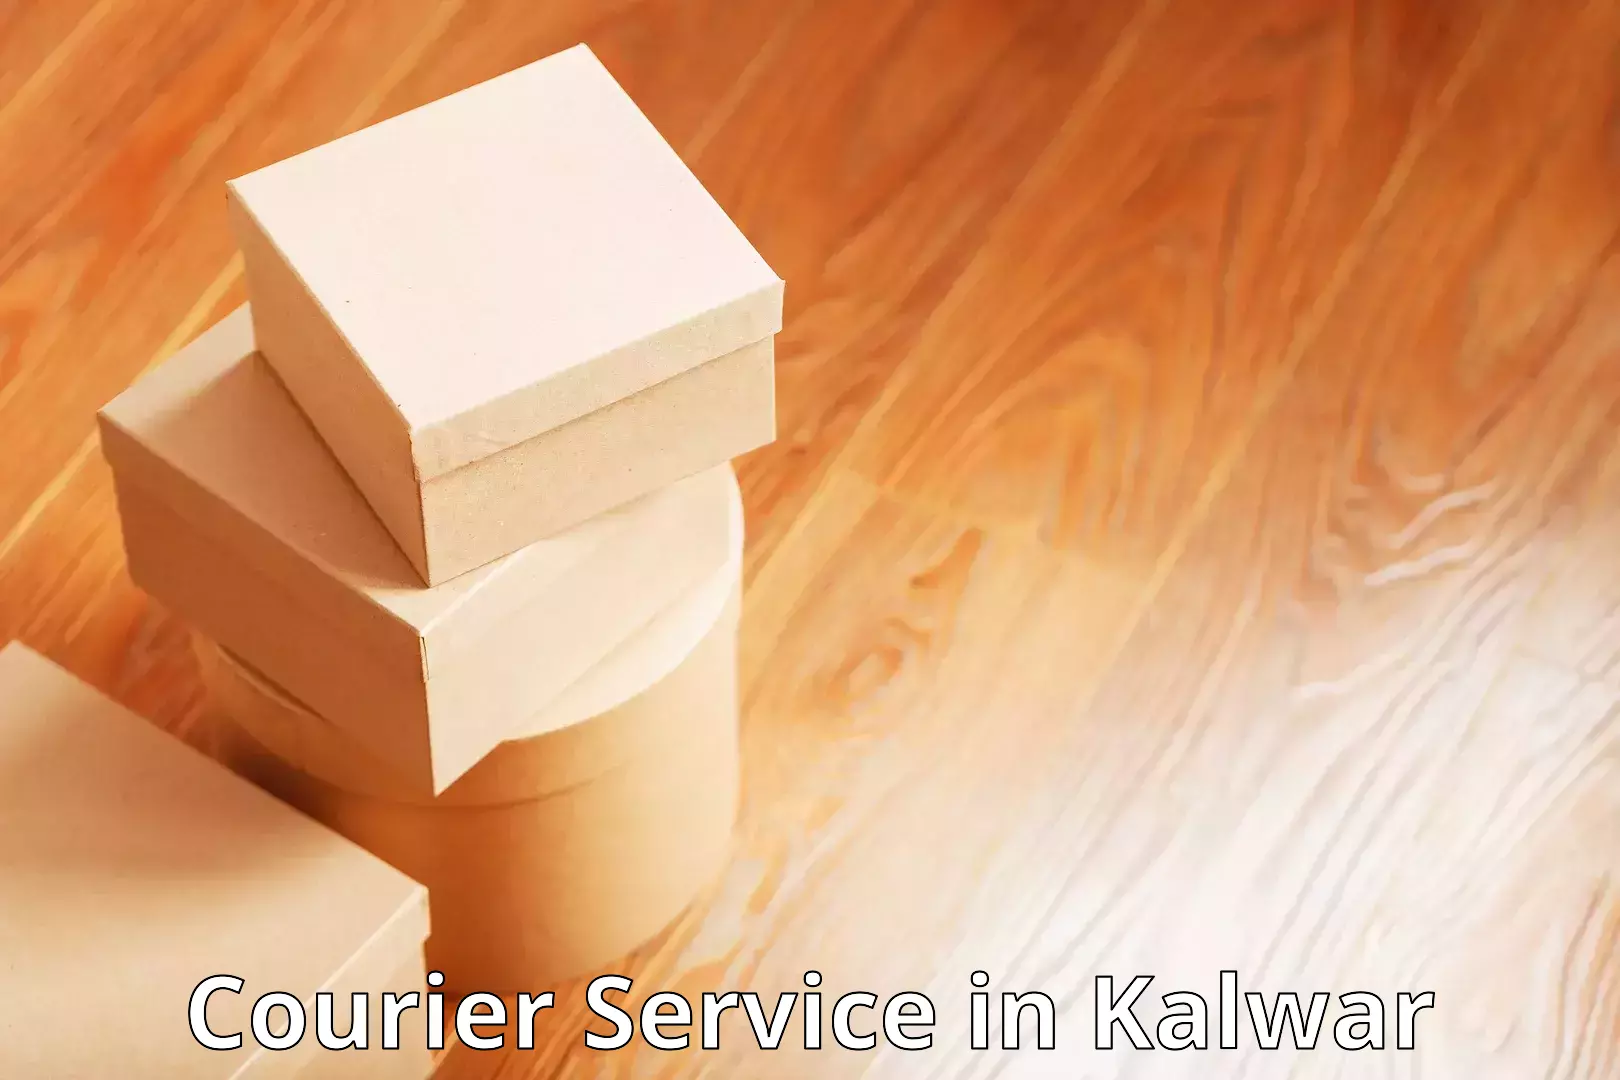 Customer-oriented courier services in Kalwar